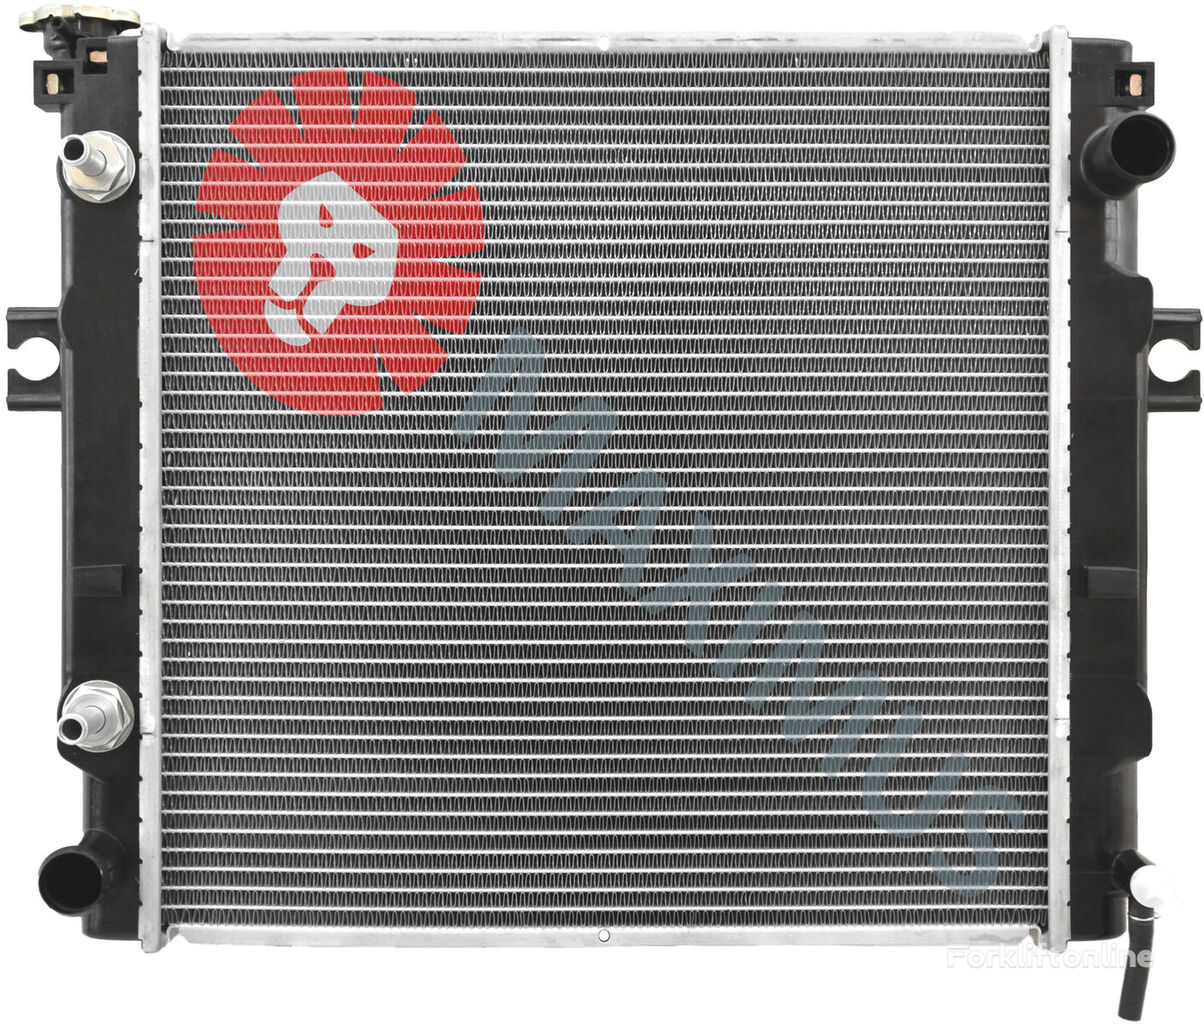 Maximus NCP0359 engine cooling radiator for Caterpillar DP15N DP18N DP20CN GP15N GP18N GP20CN diesel forklift